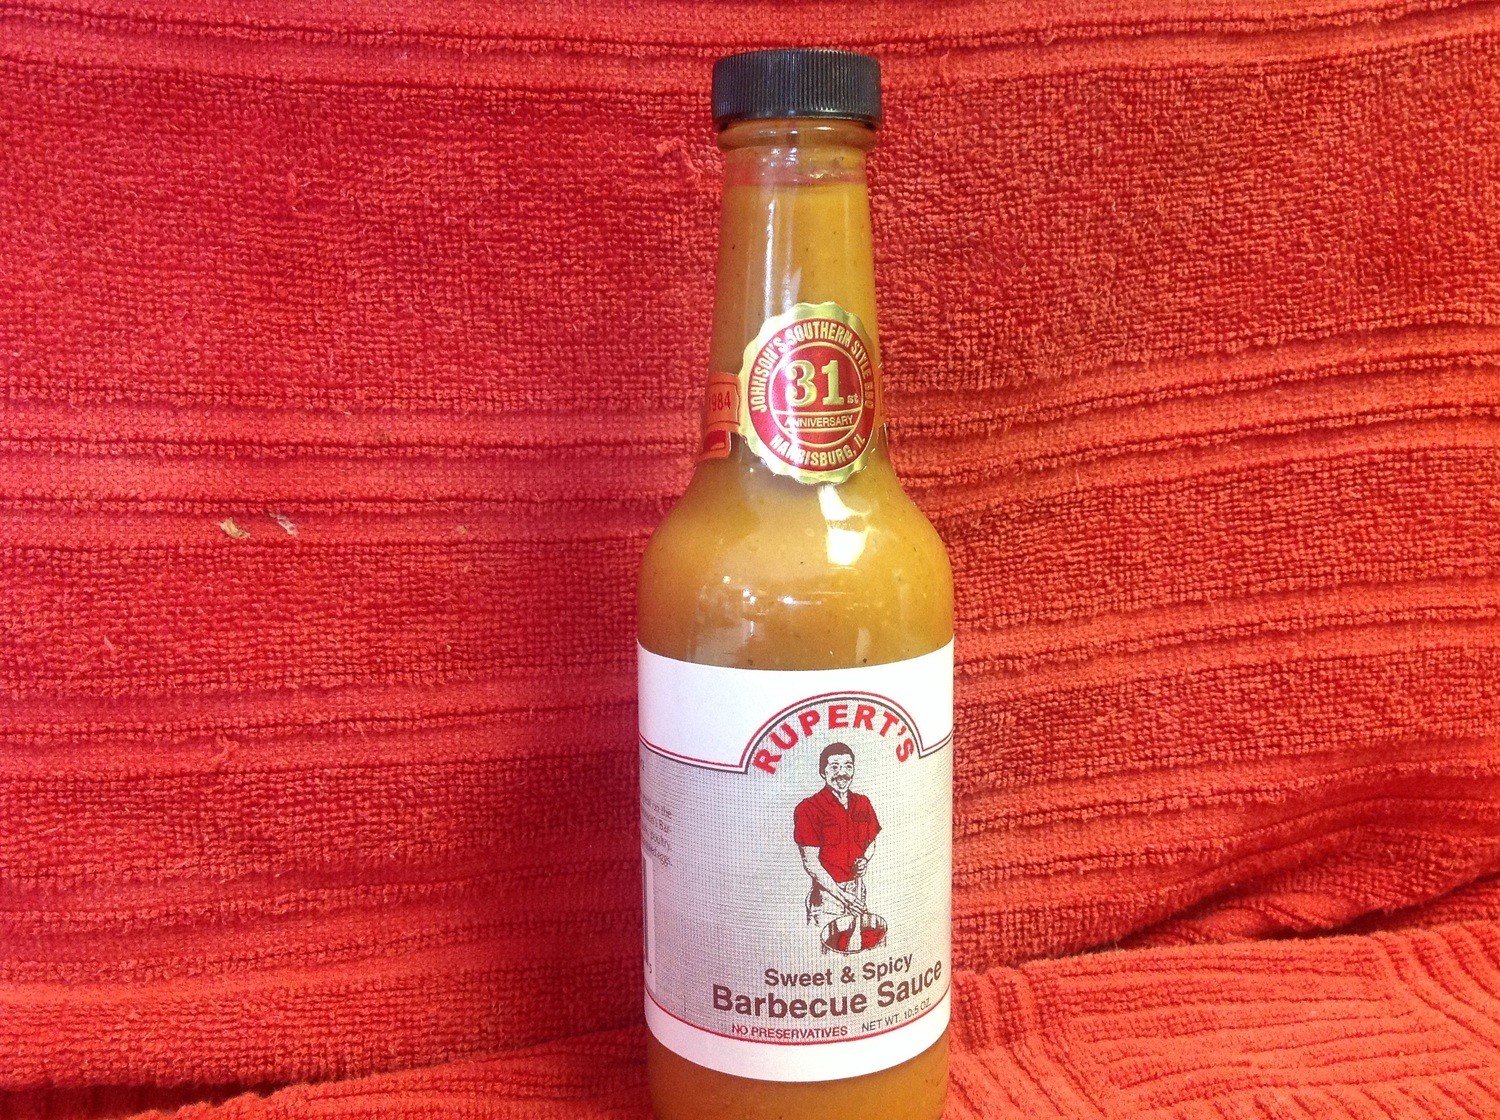 Johnson's Sweet & Spicy Barbeque Sauce (Case of 12)